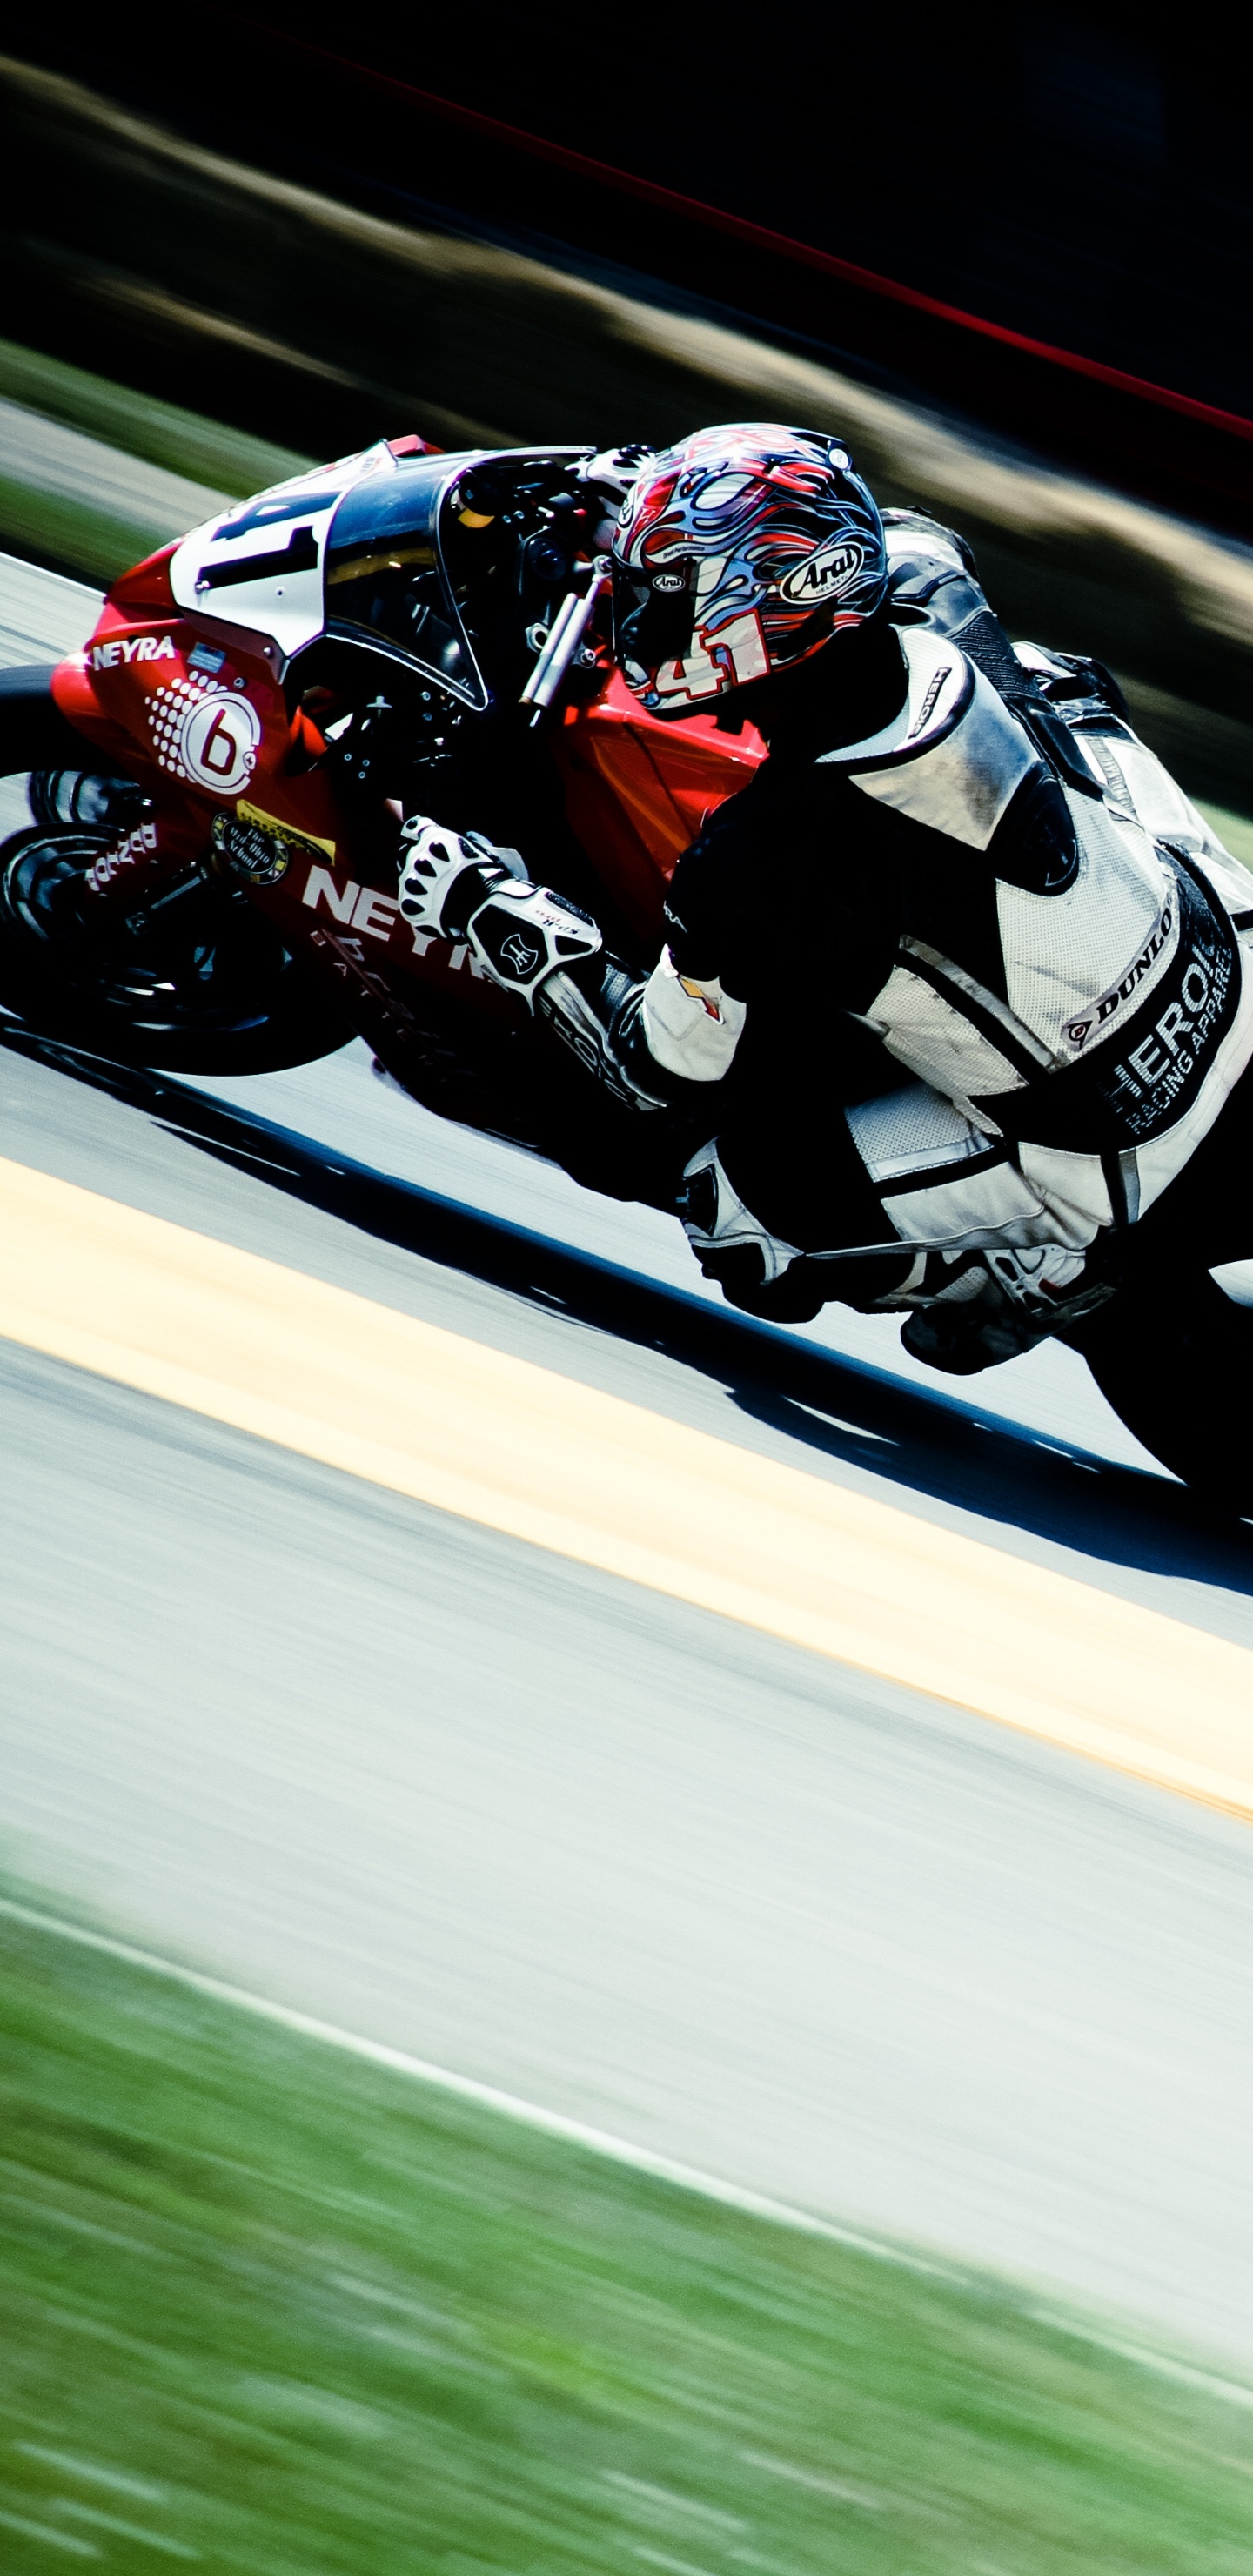 Man in Red and White Racing Suit Riding on Sports Bike. Wallpaper in 1440x2960 Resolution